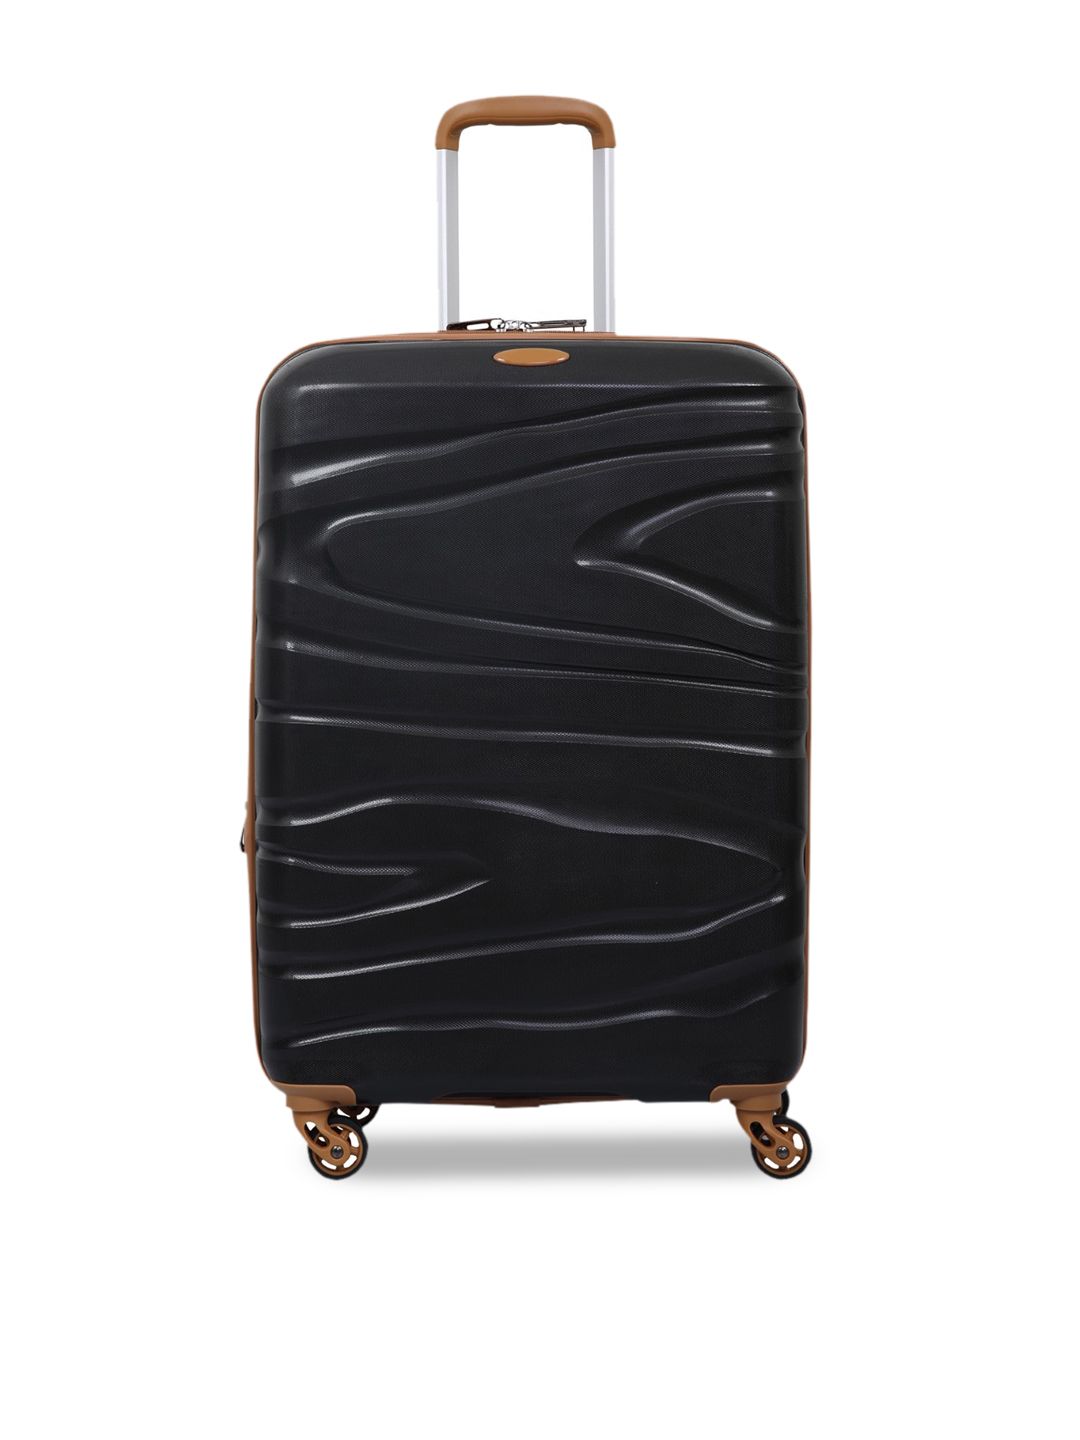 Polo Class Black 20 Inch Trolley Bag Price in India